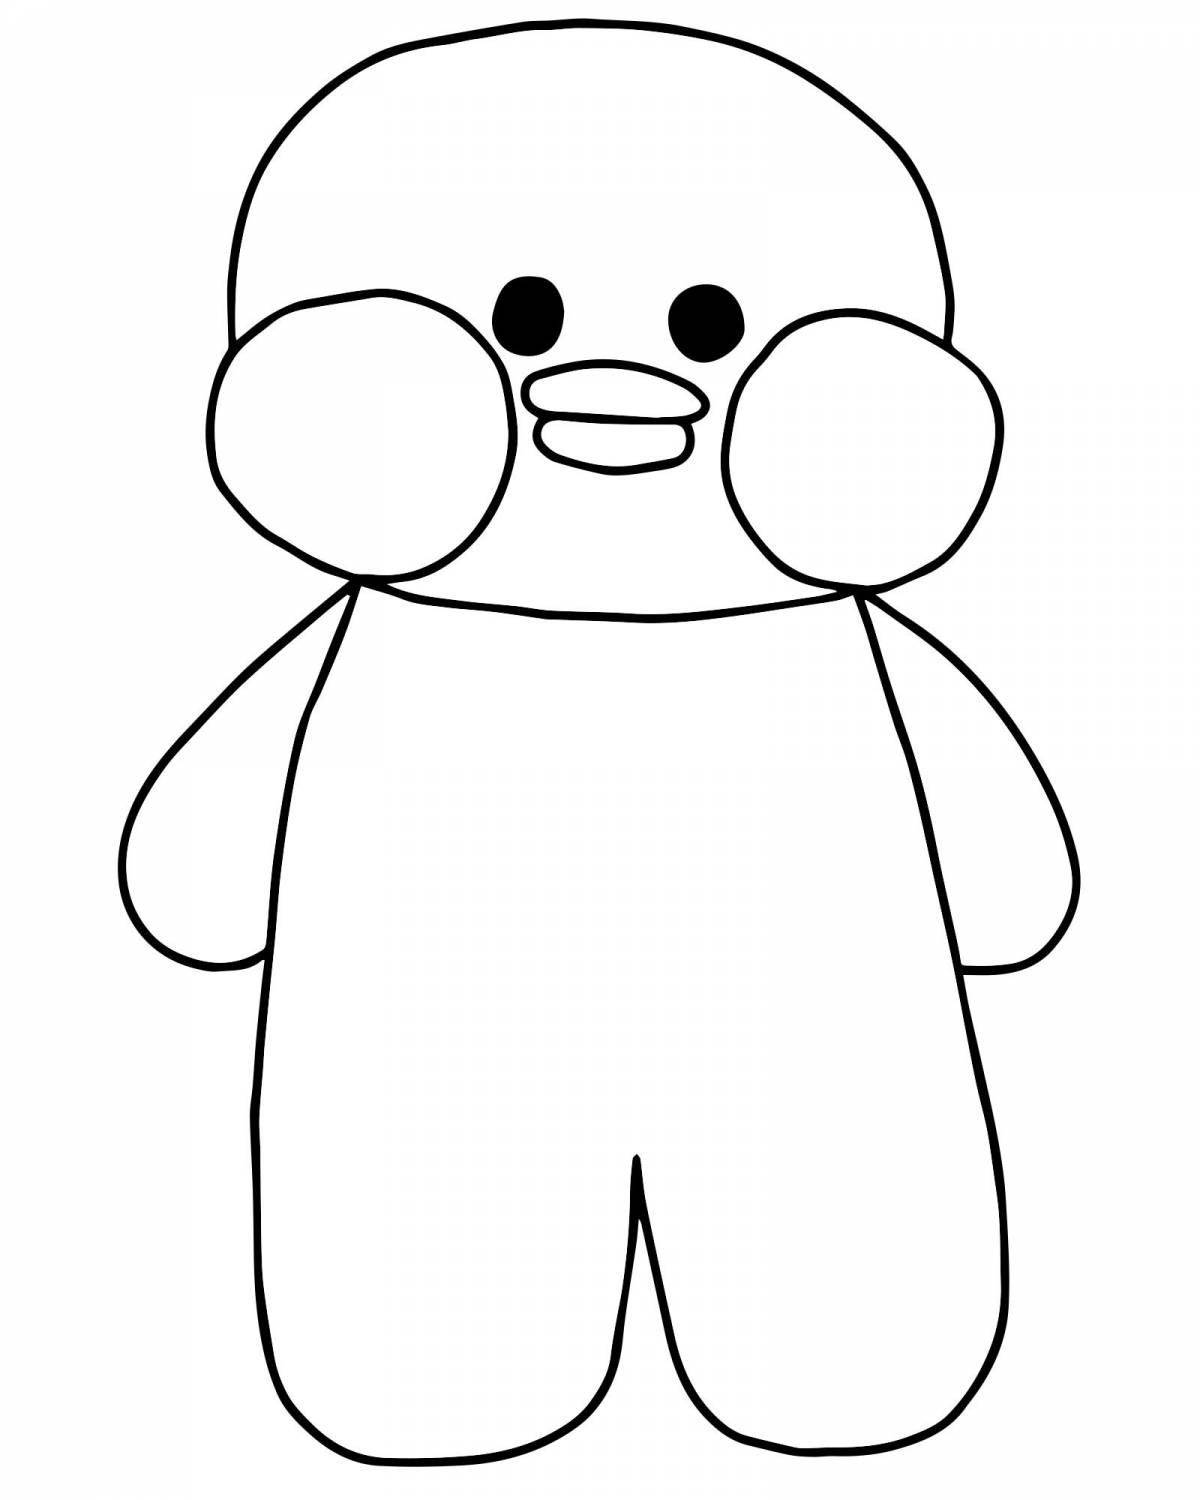 Colorful dressed duck coloring page